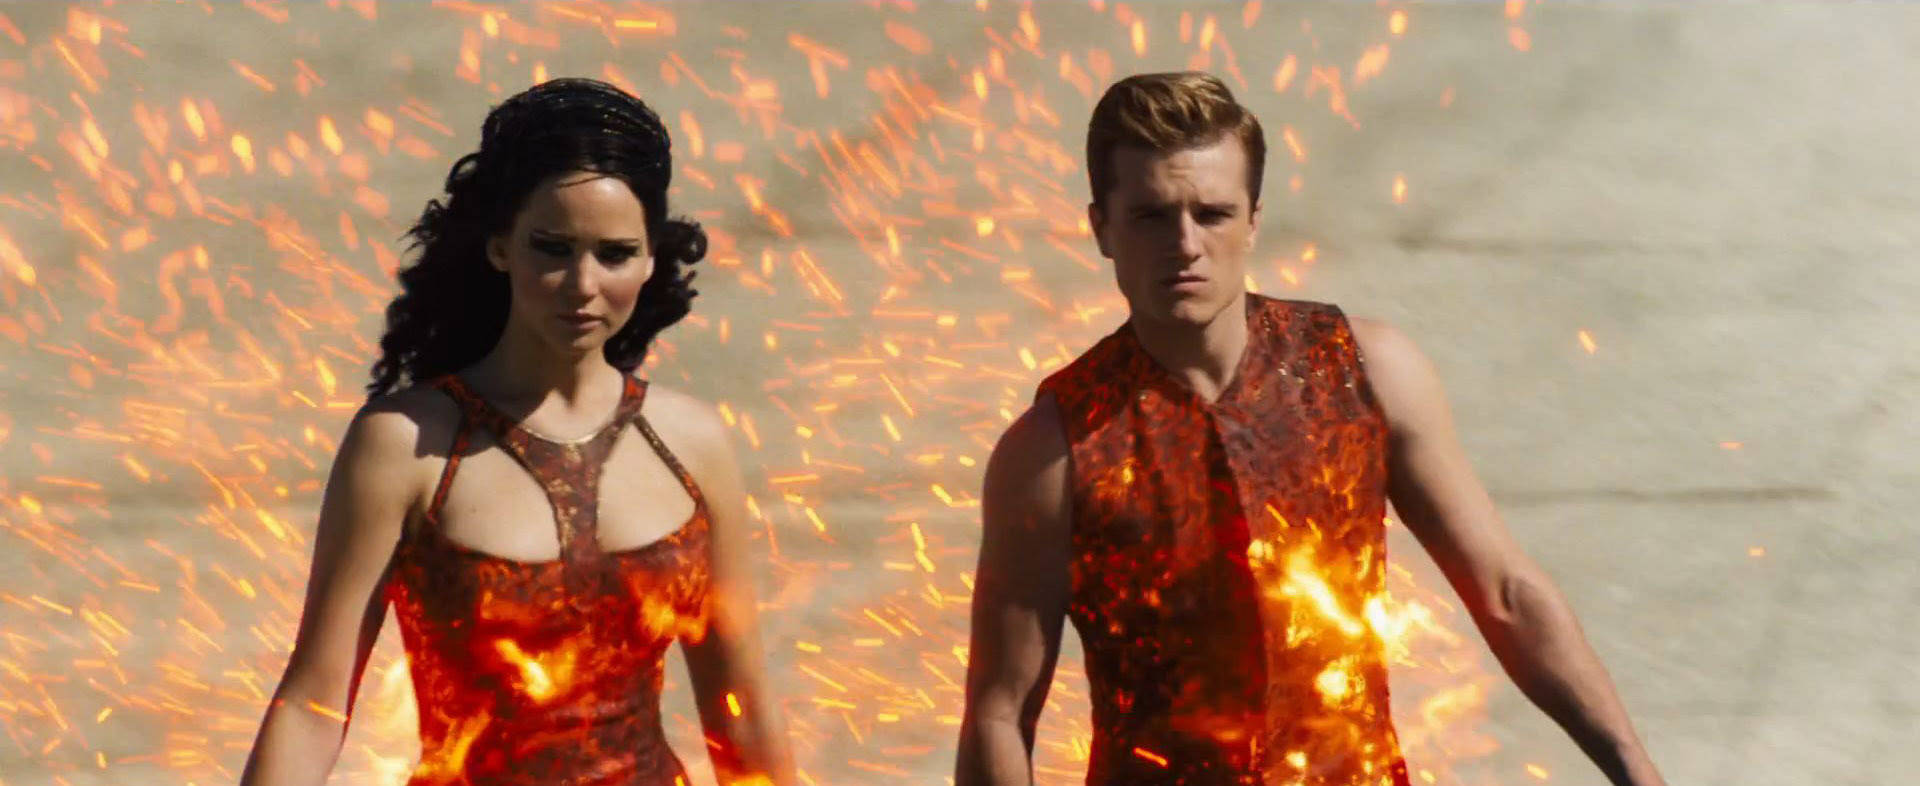 The Hunger Games Flaming Outfit